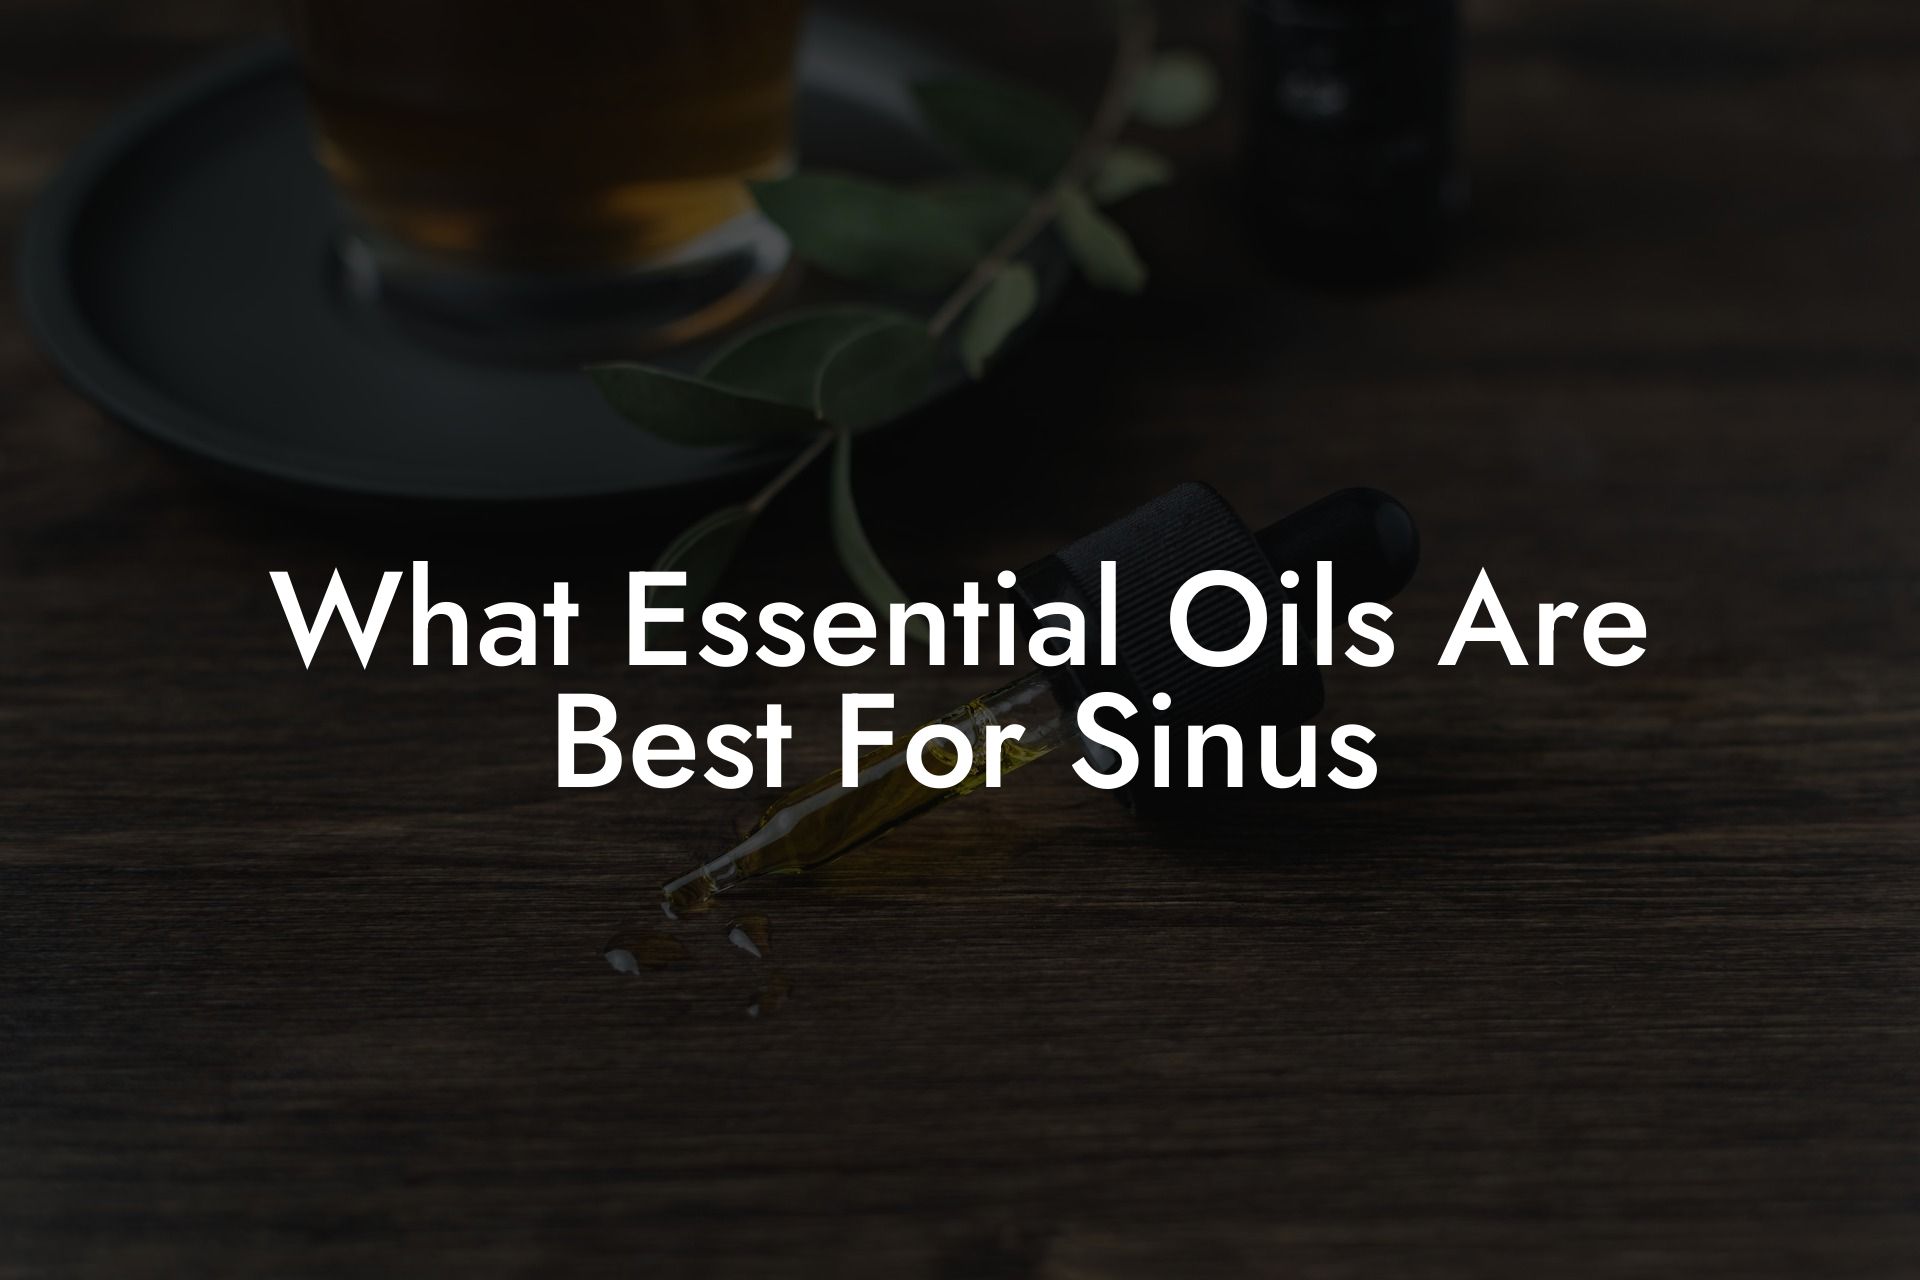 What Essential Oils Are Best For Sinus